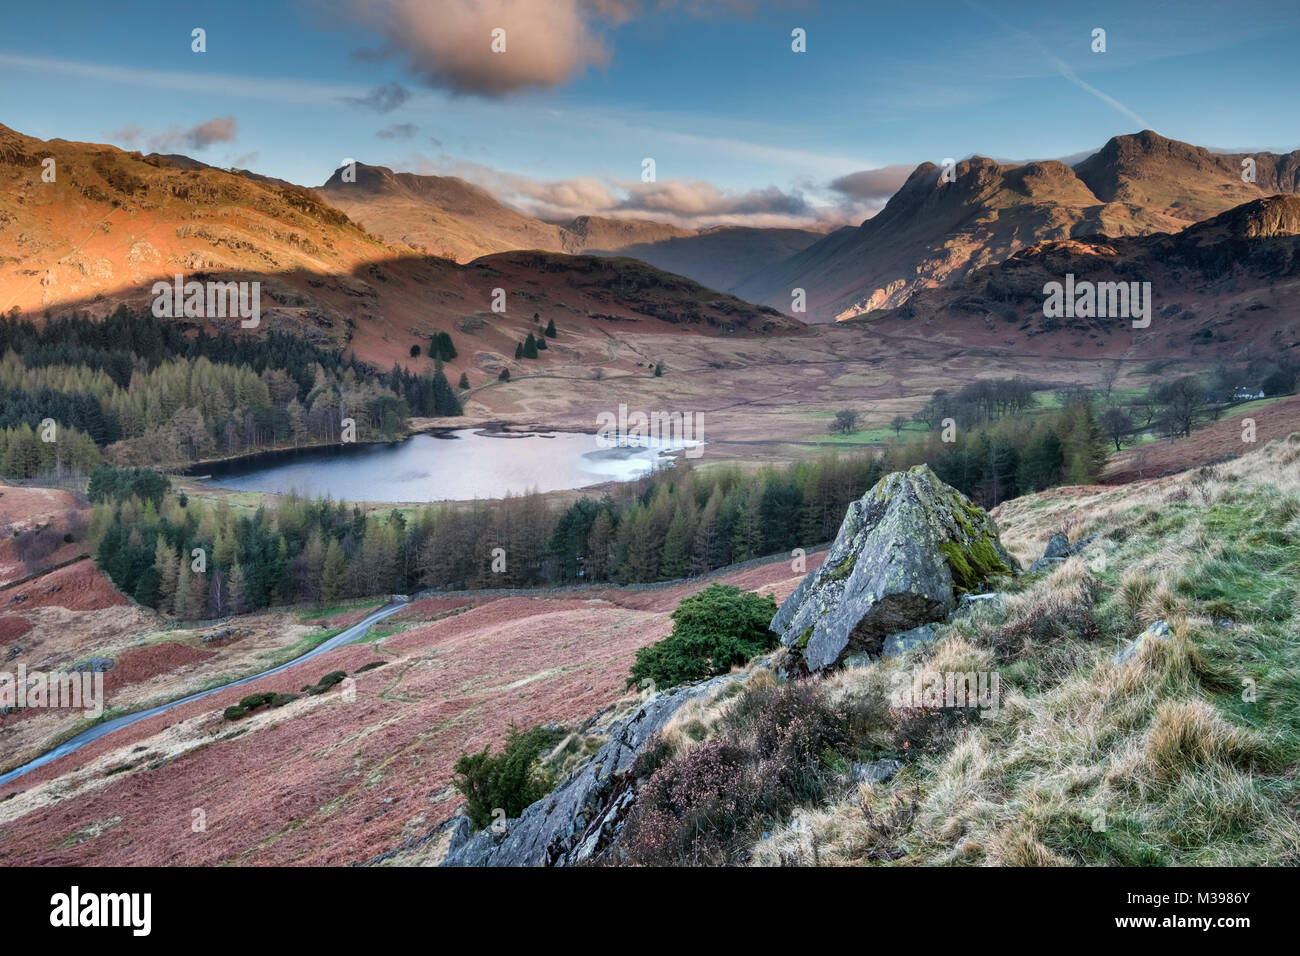 Blea Tarn and the Langdale Pikes at sunrise, Little Langdale, Lake District National Park, Cumbria, England, UK Stock Photo